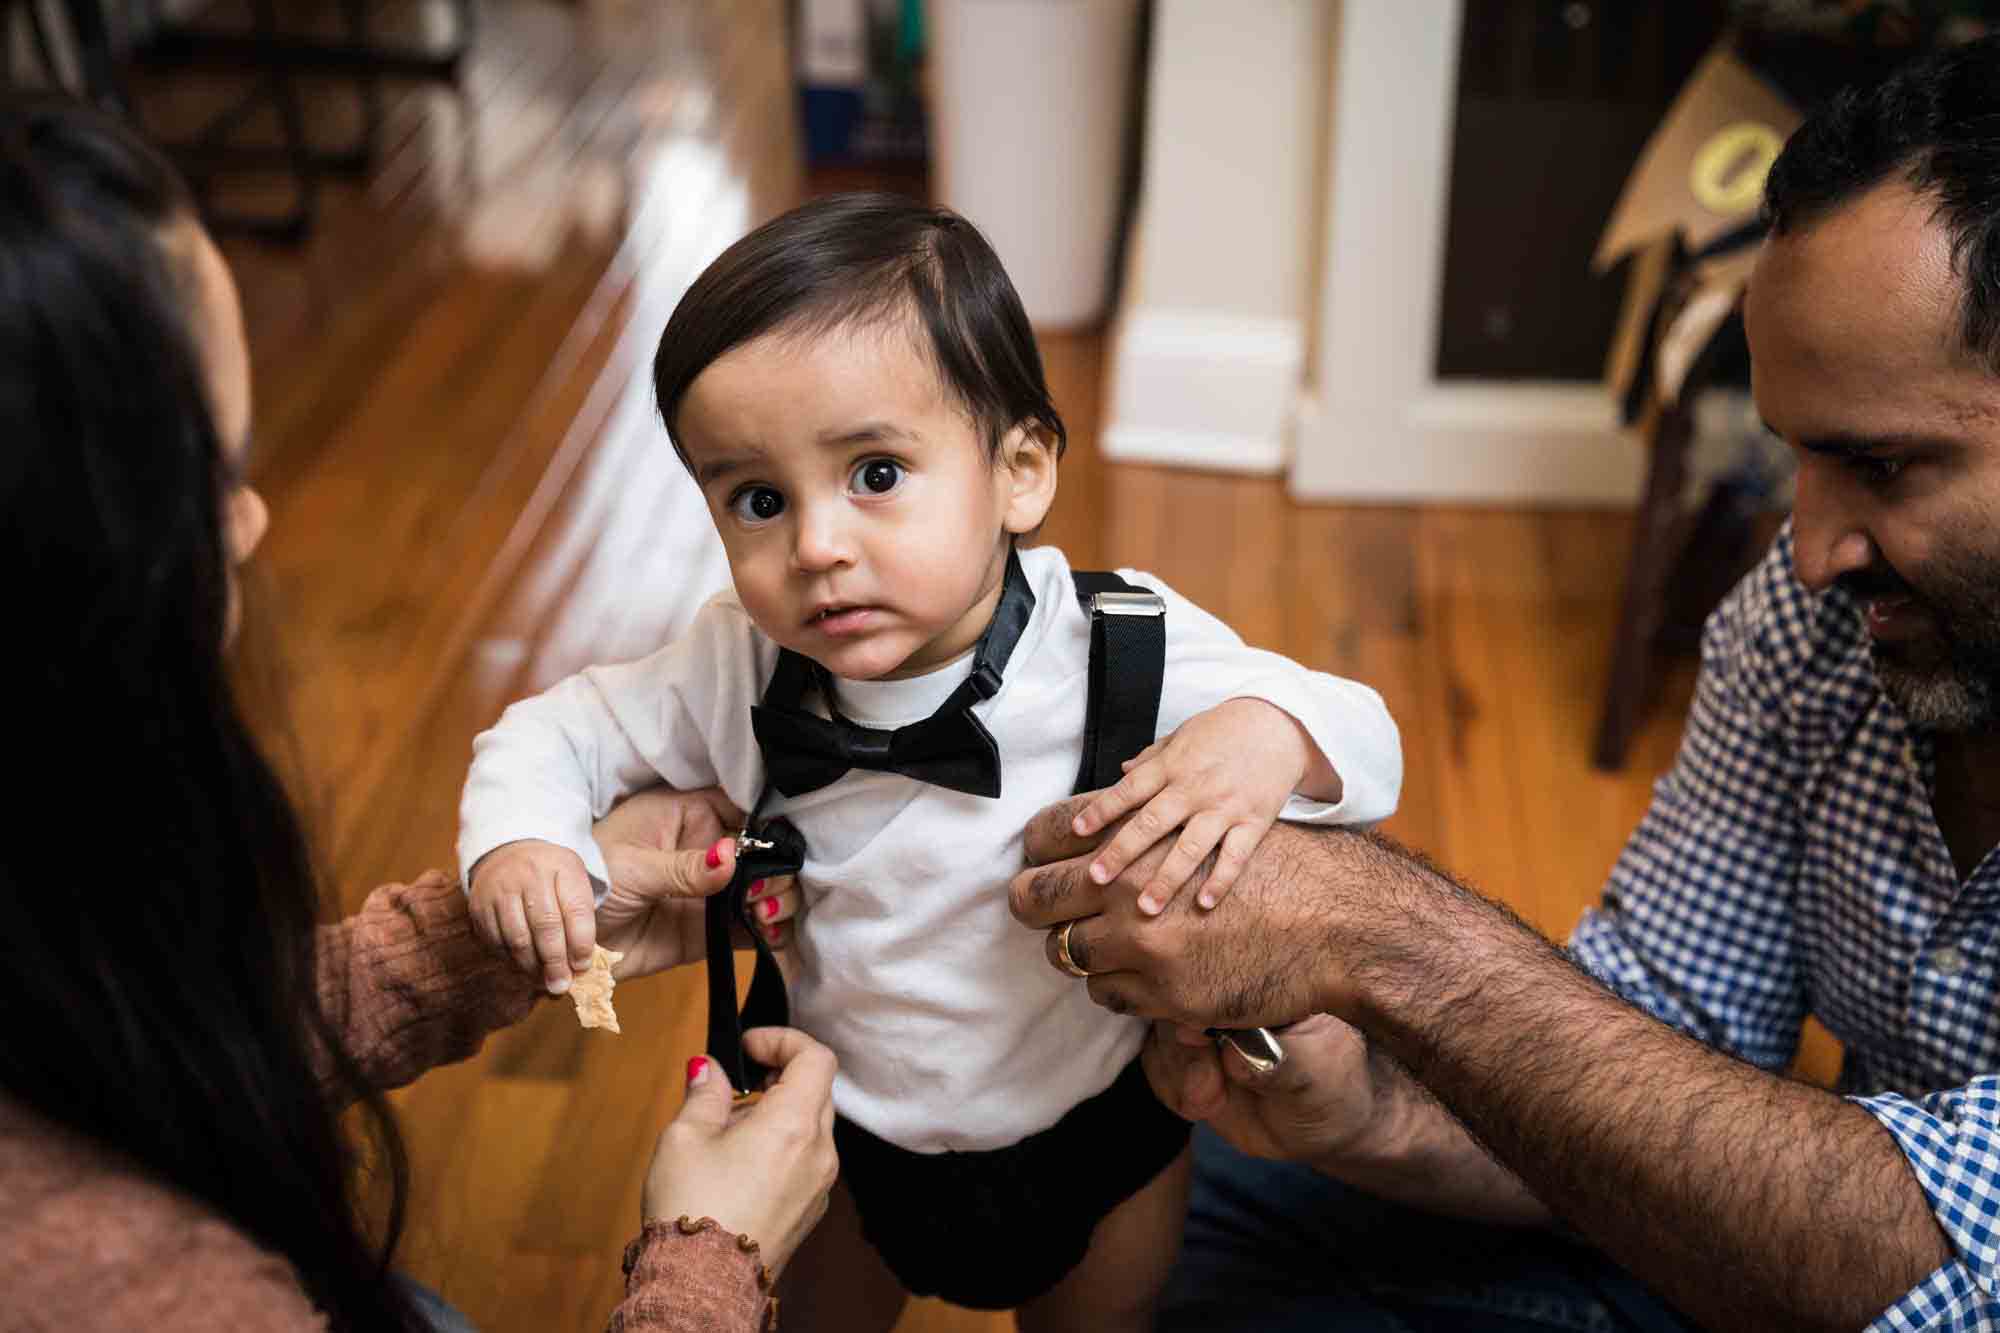 Little boy standing on wooden floor with mother and father adjusting his black suspenders